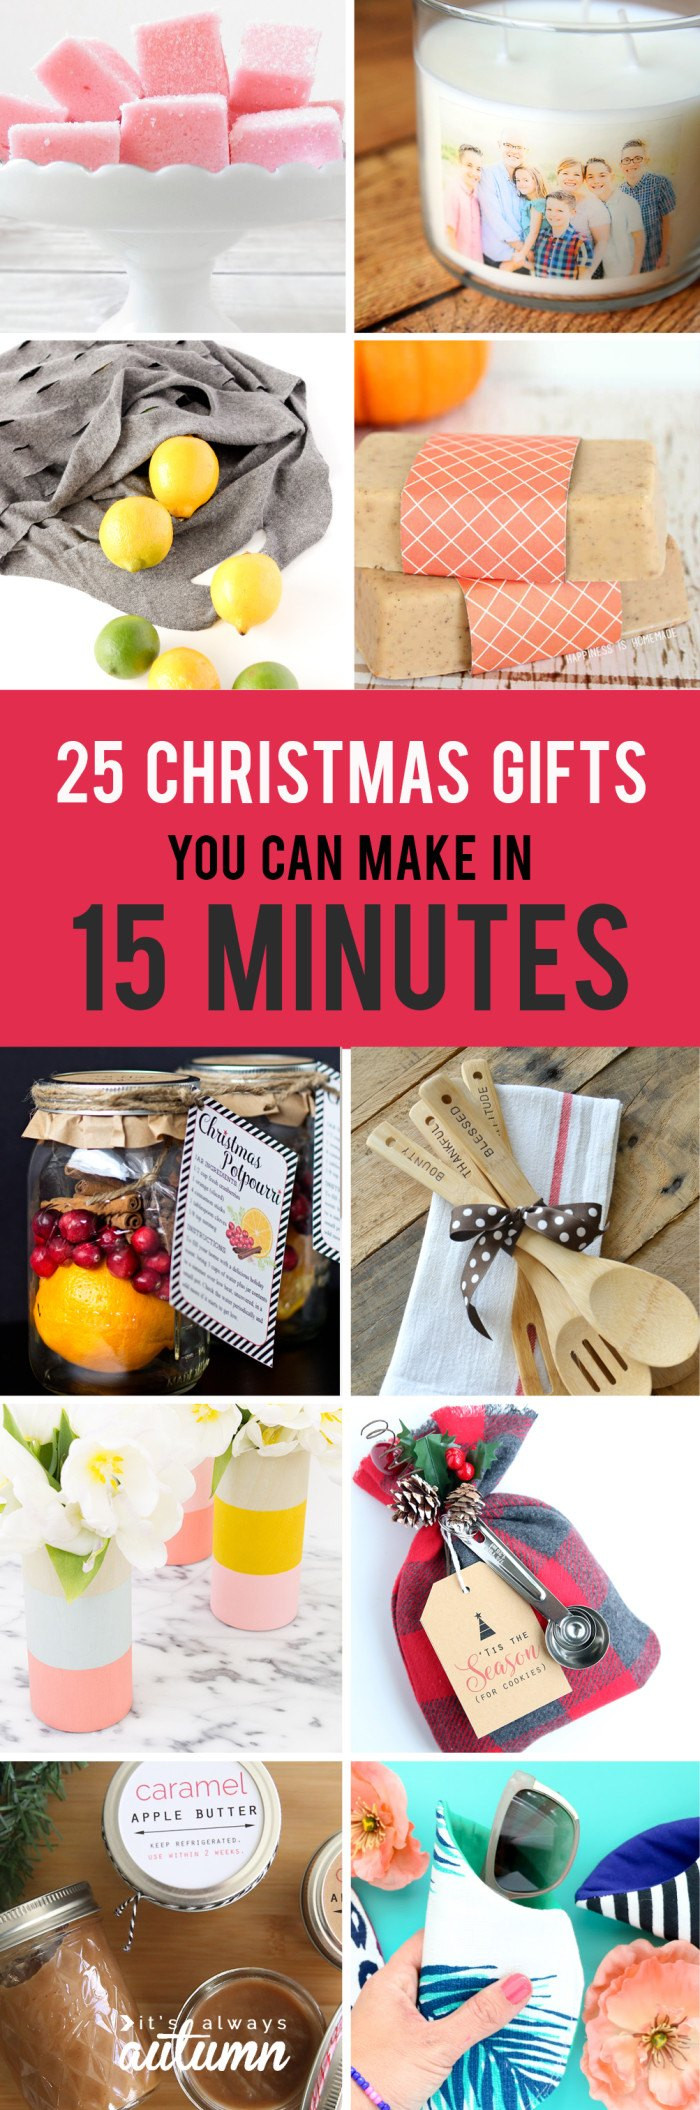 DIY Xmas Gift Ideas
 25 Easy Christmas Gifts That You Can Make in 15 Minutes